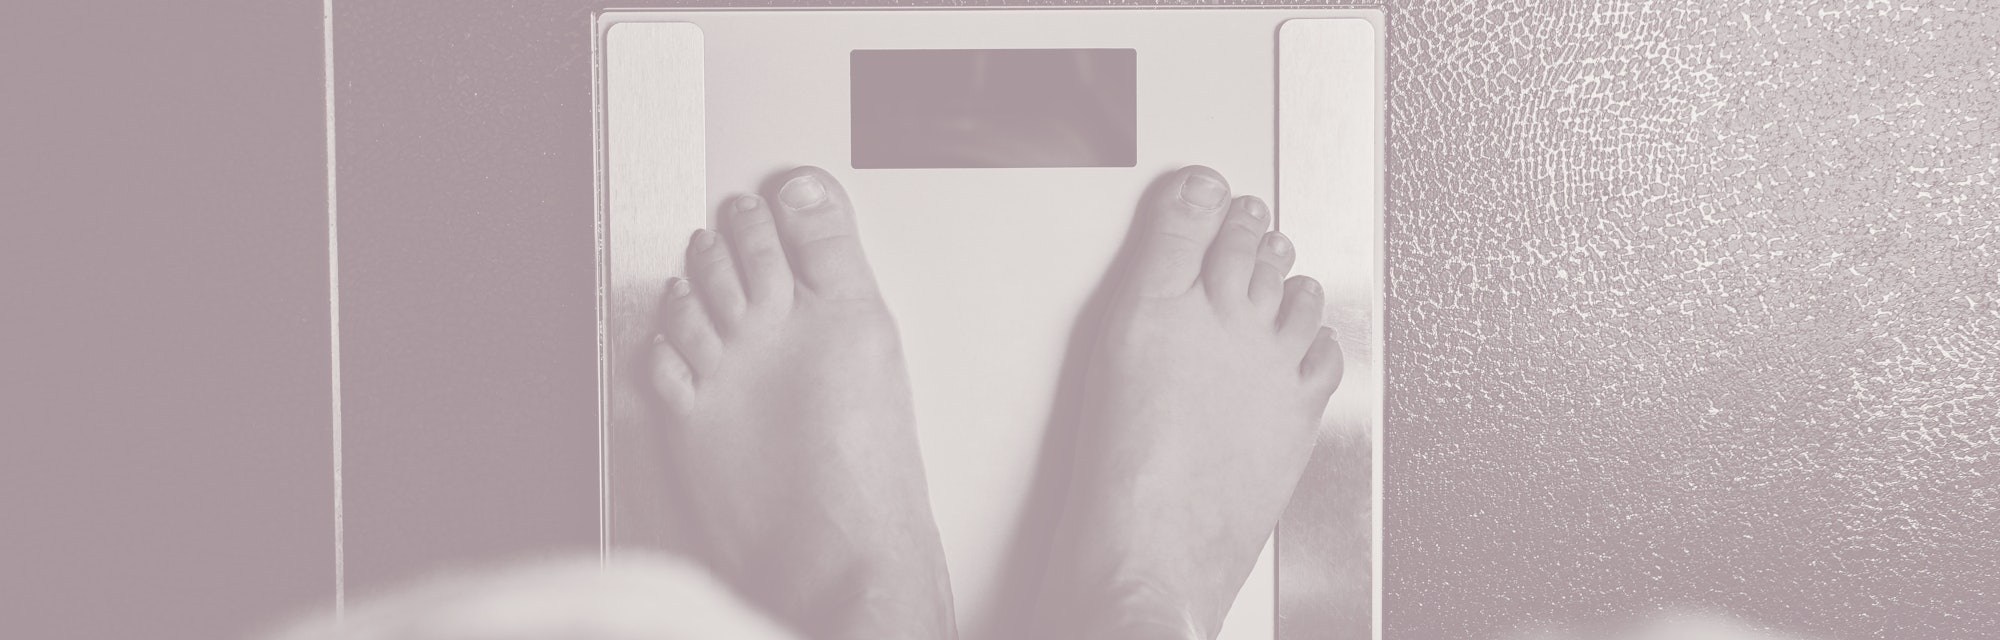 Female bare feet with weight scale, top view